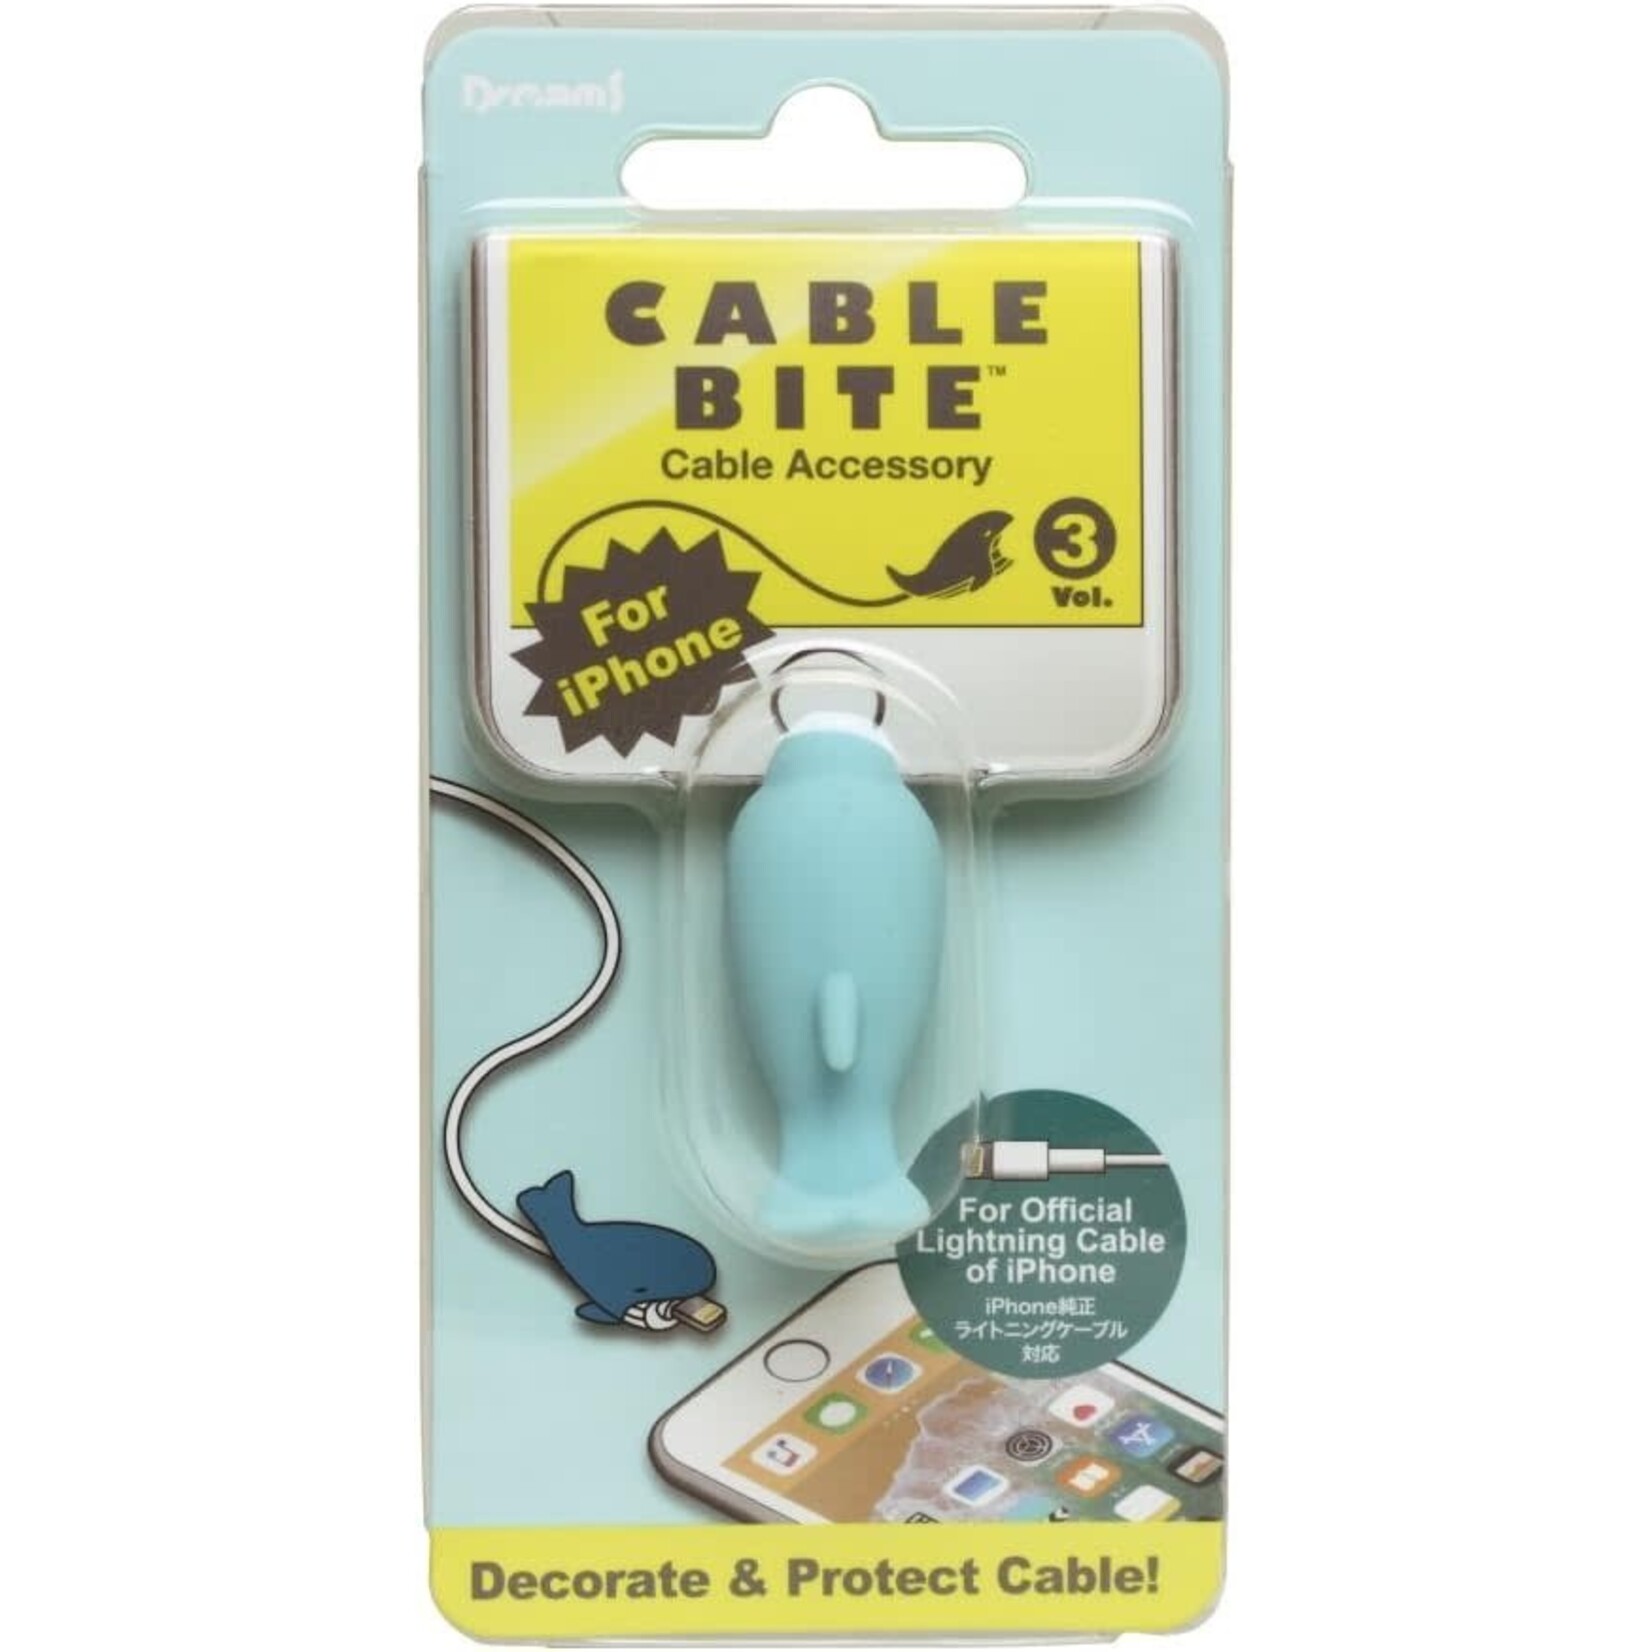 Dreams Cable Bite - iPhone Lightning Cable - Dolphin (vol.3)